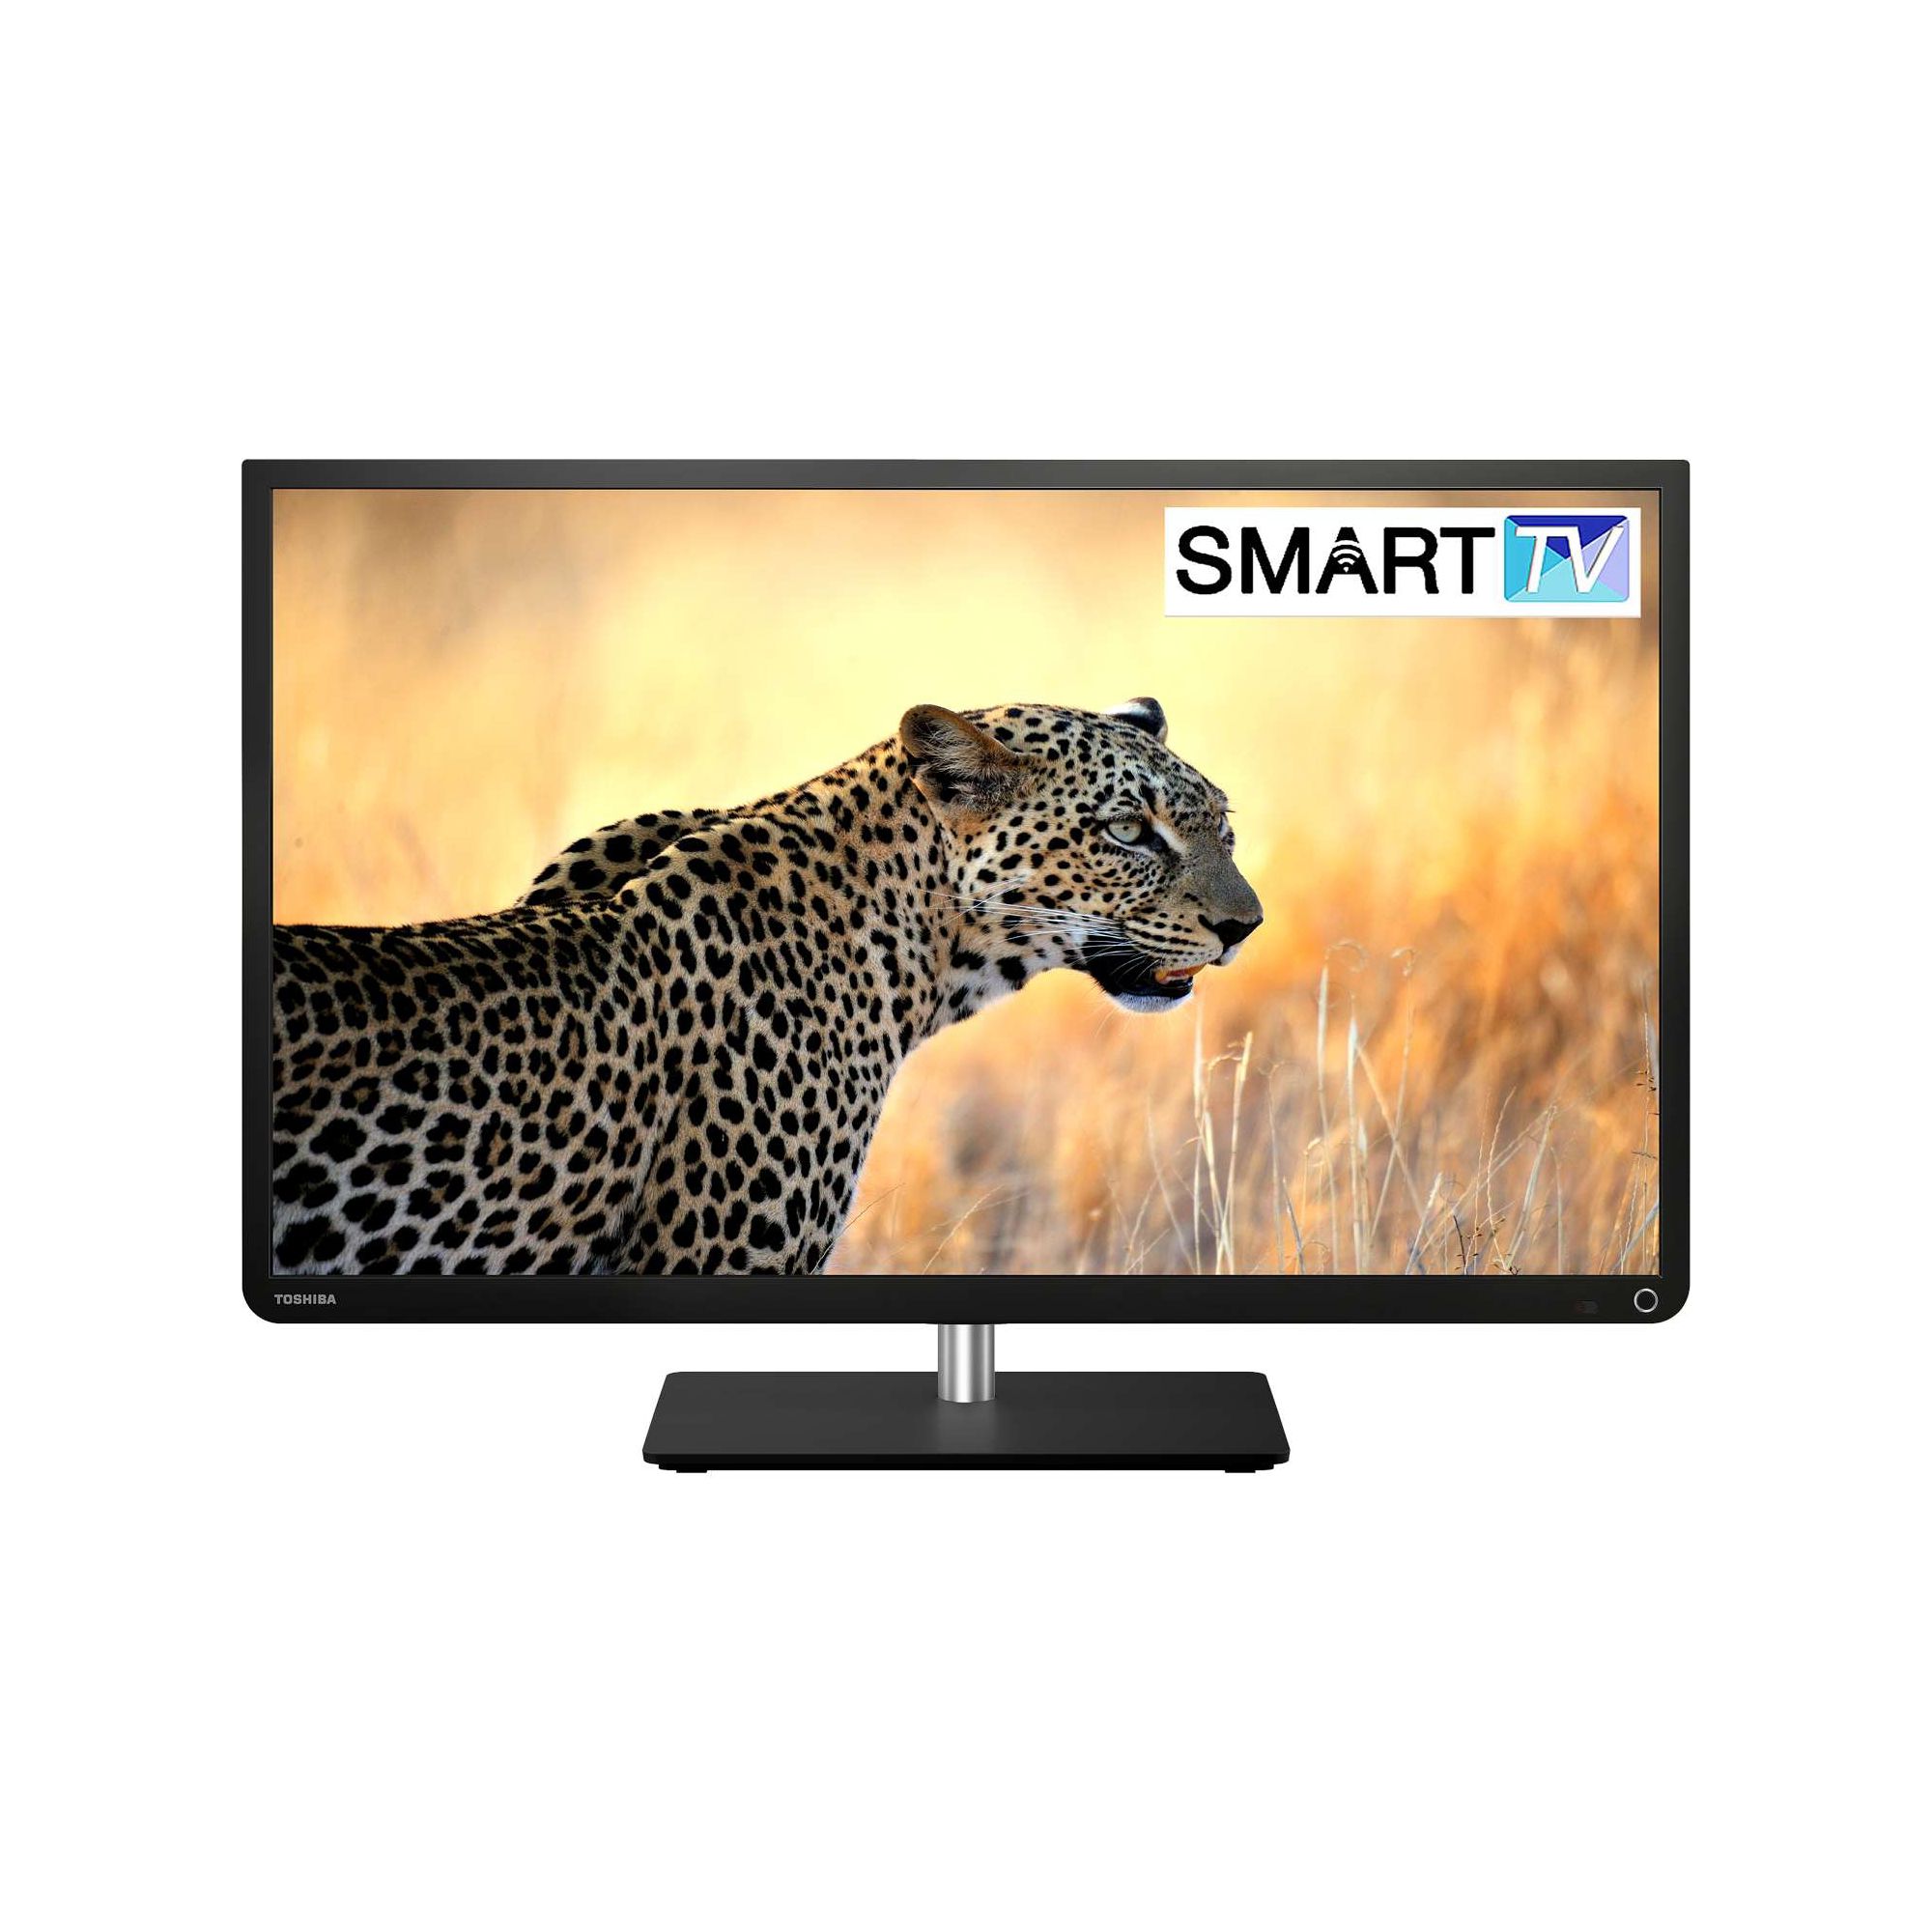 Toshiba 39L4353B 39 Inch Smart 1080P Full HD LED TV With Freeview HD